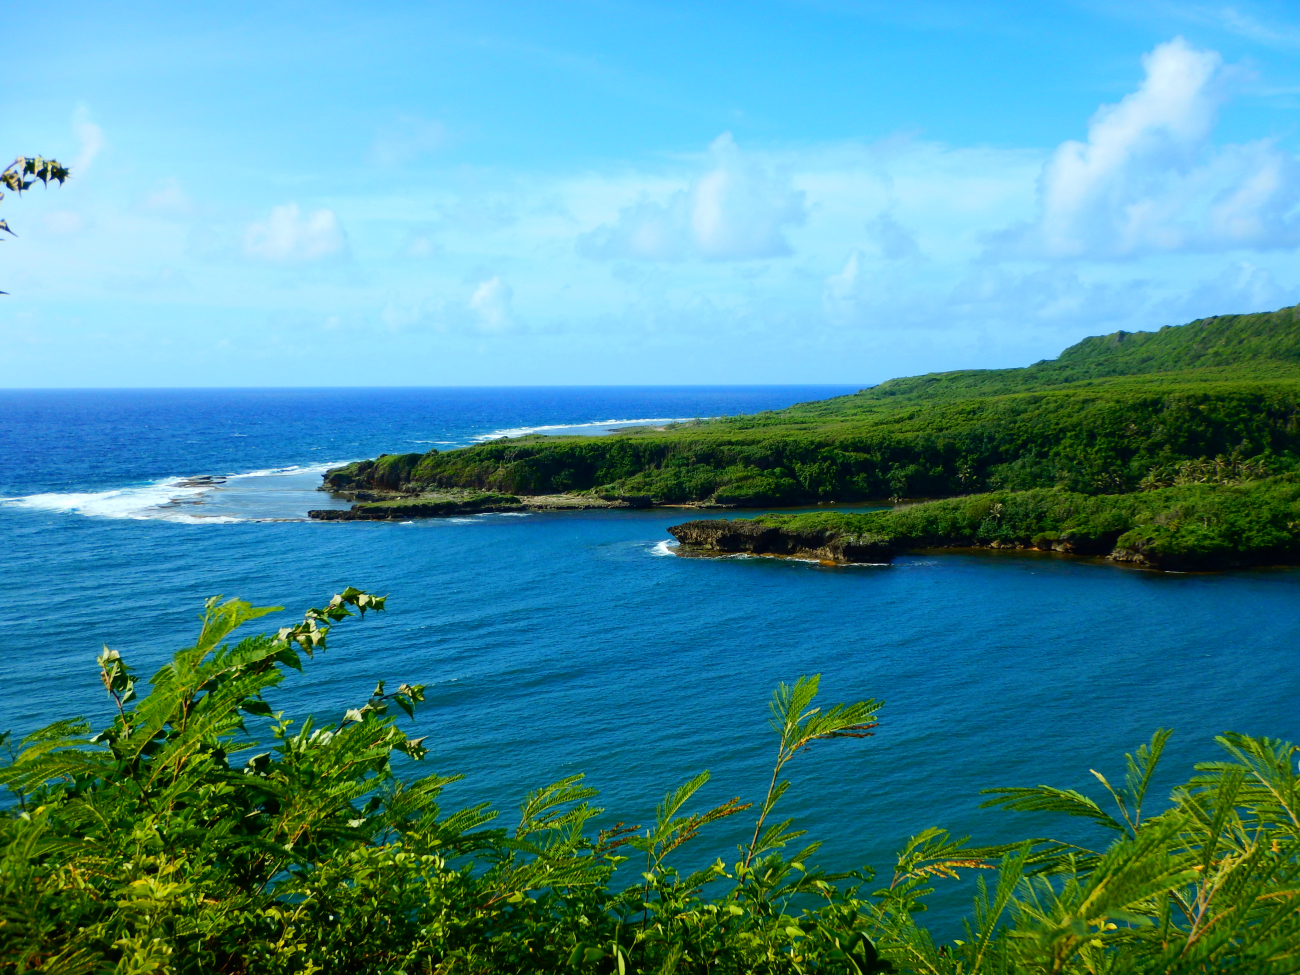 A view of the south side of Talofofo Bay on the east side of Guam